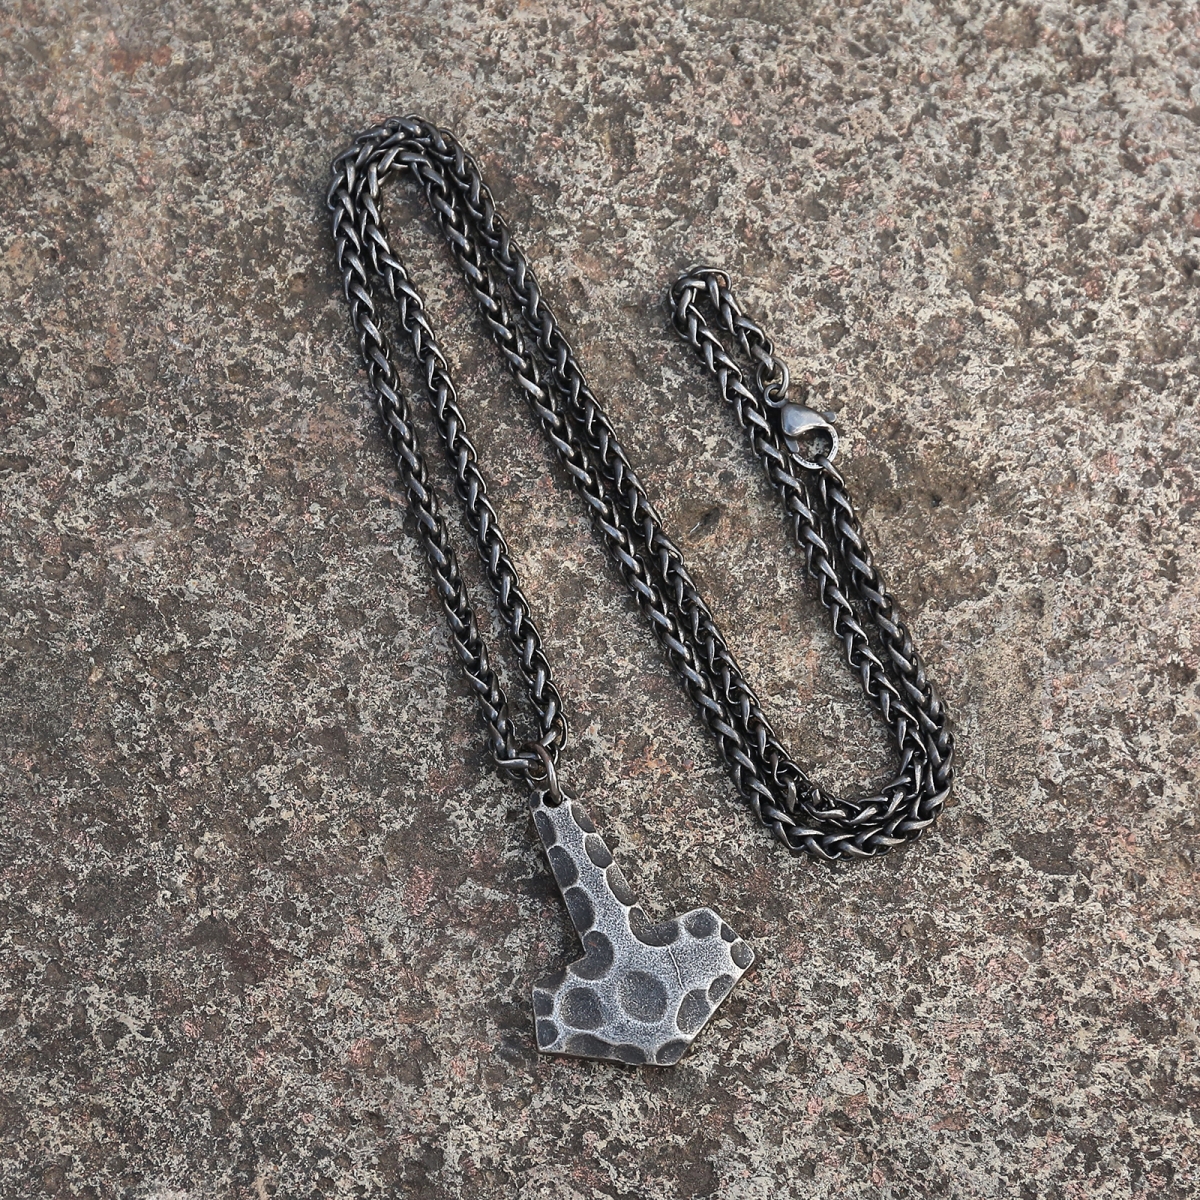 Thor Hammer Necklace US$3.8/PC-NORSECOLLECTION- Viking Jewelry,Viking Necklace,Viking Bracelet,Viking Rings,Viking Mugs,Viking Accessories,Viking Crafts